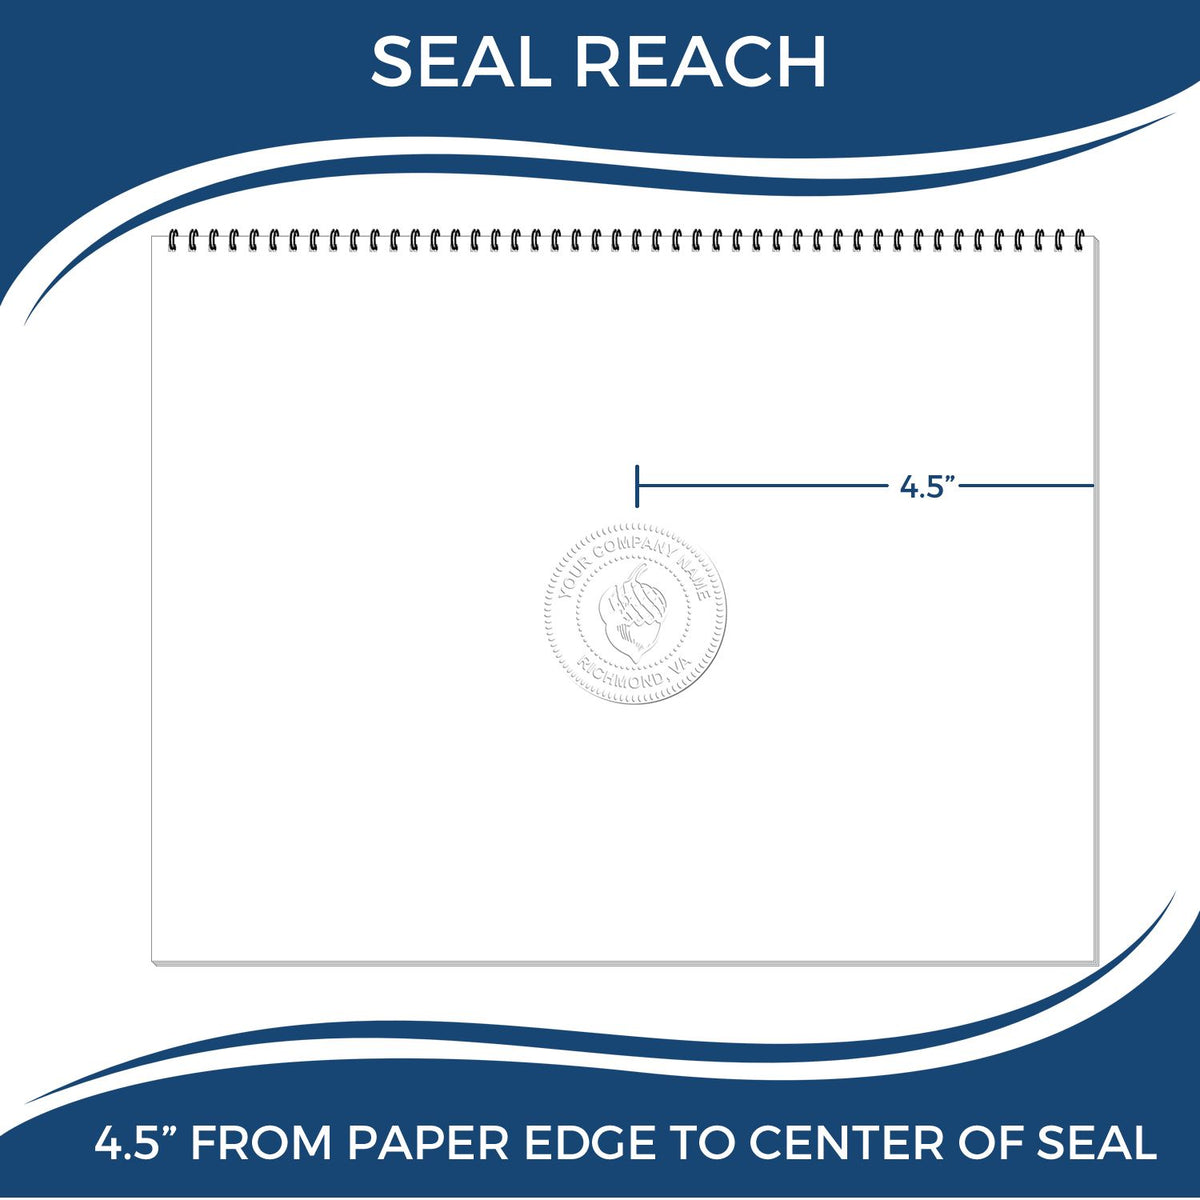 An infographic showing the seal reach which is represented by a ruler and a miniature seal image of the Extended Long Reach Hawaii Surveyor Embosser